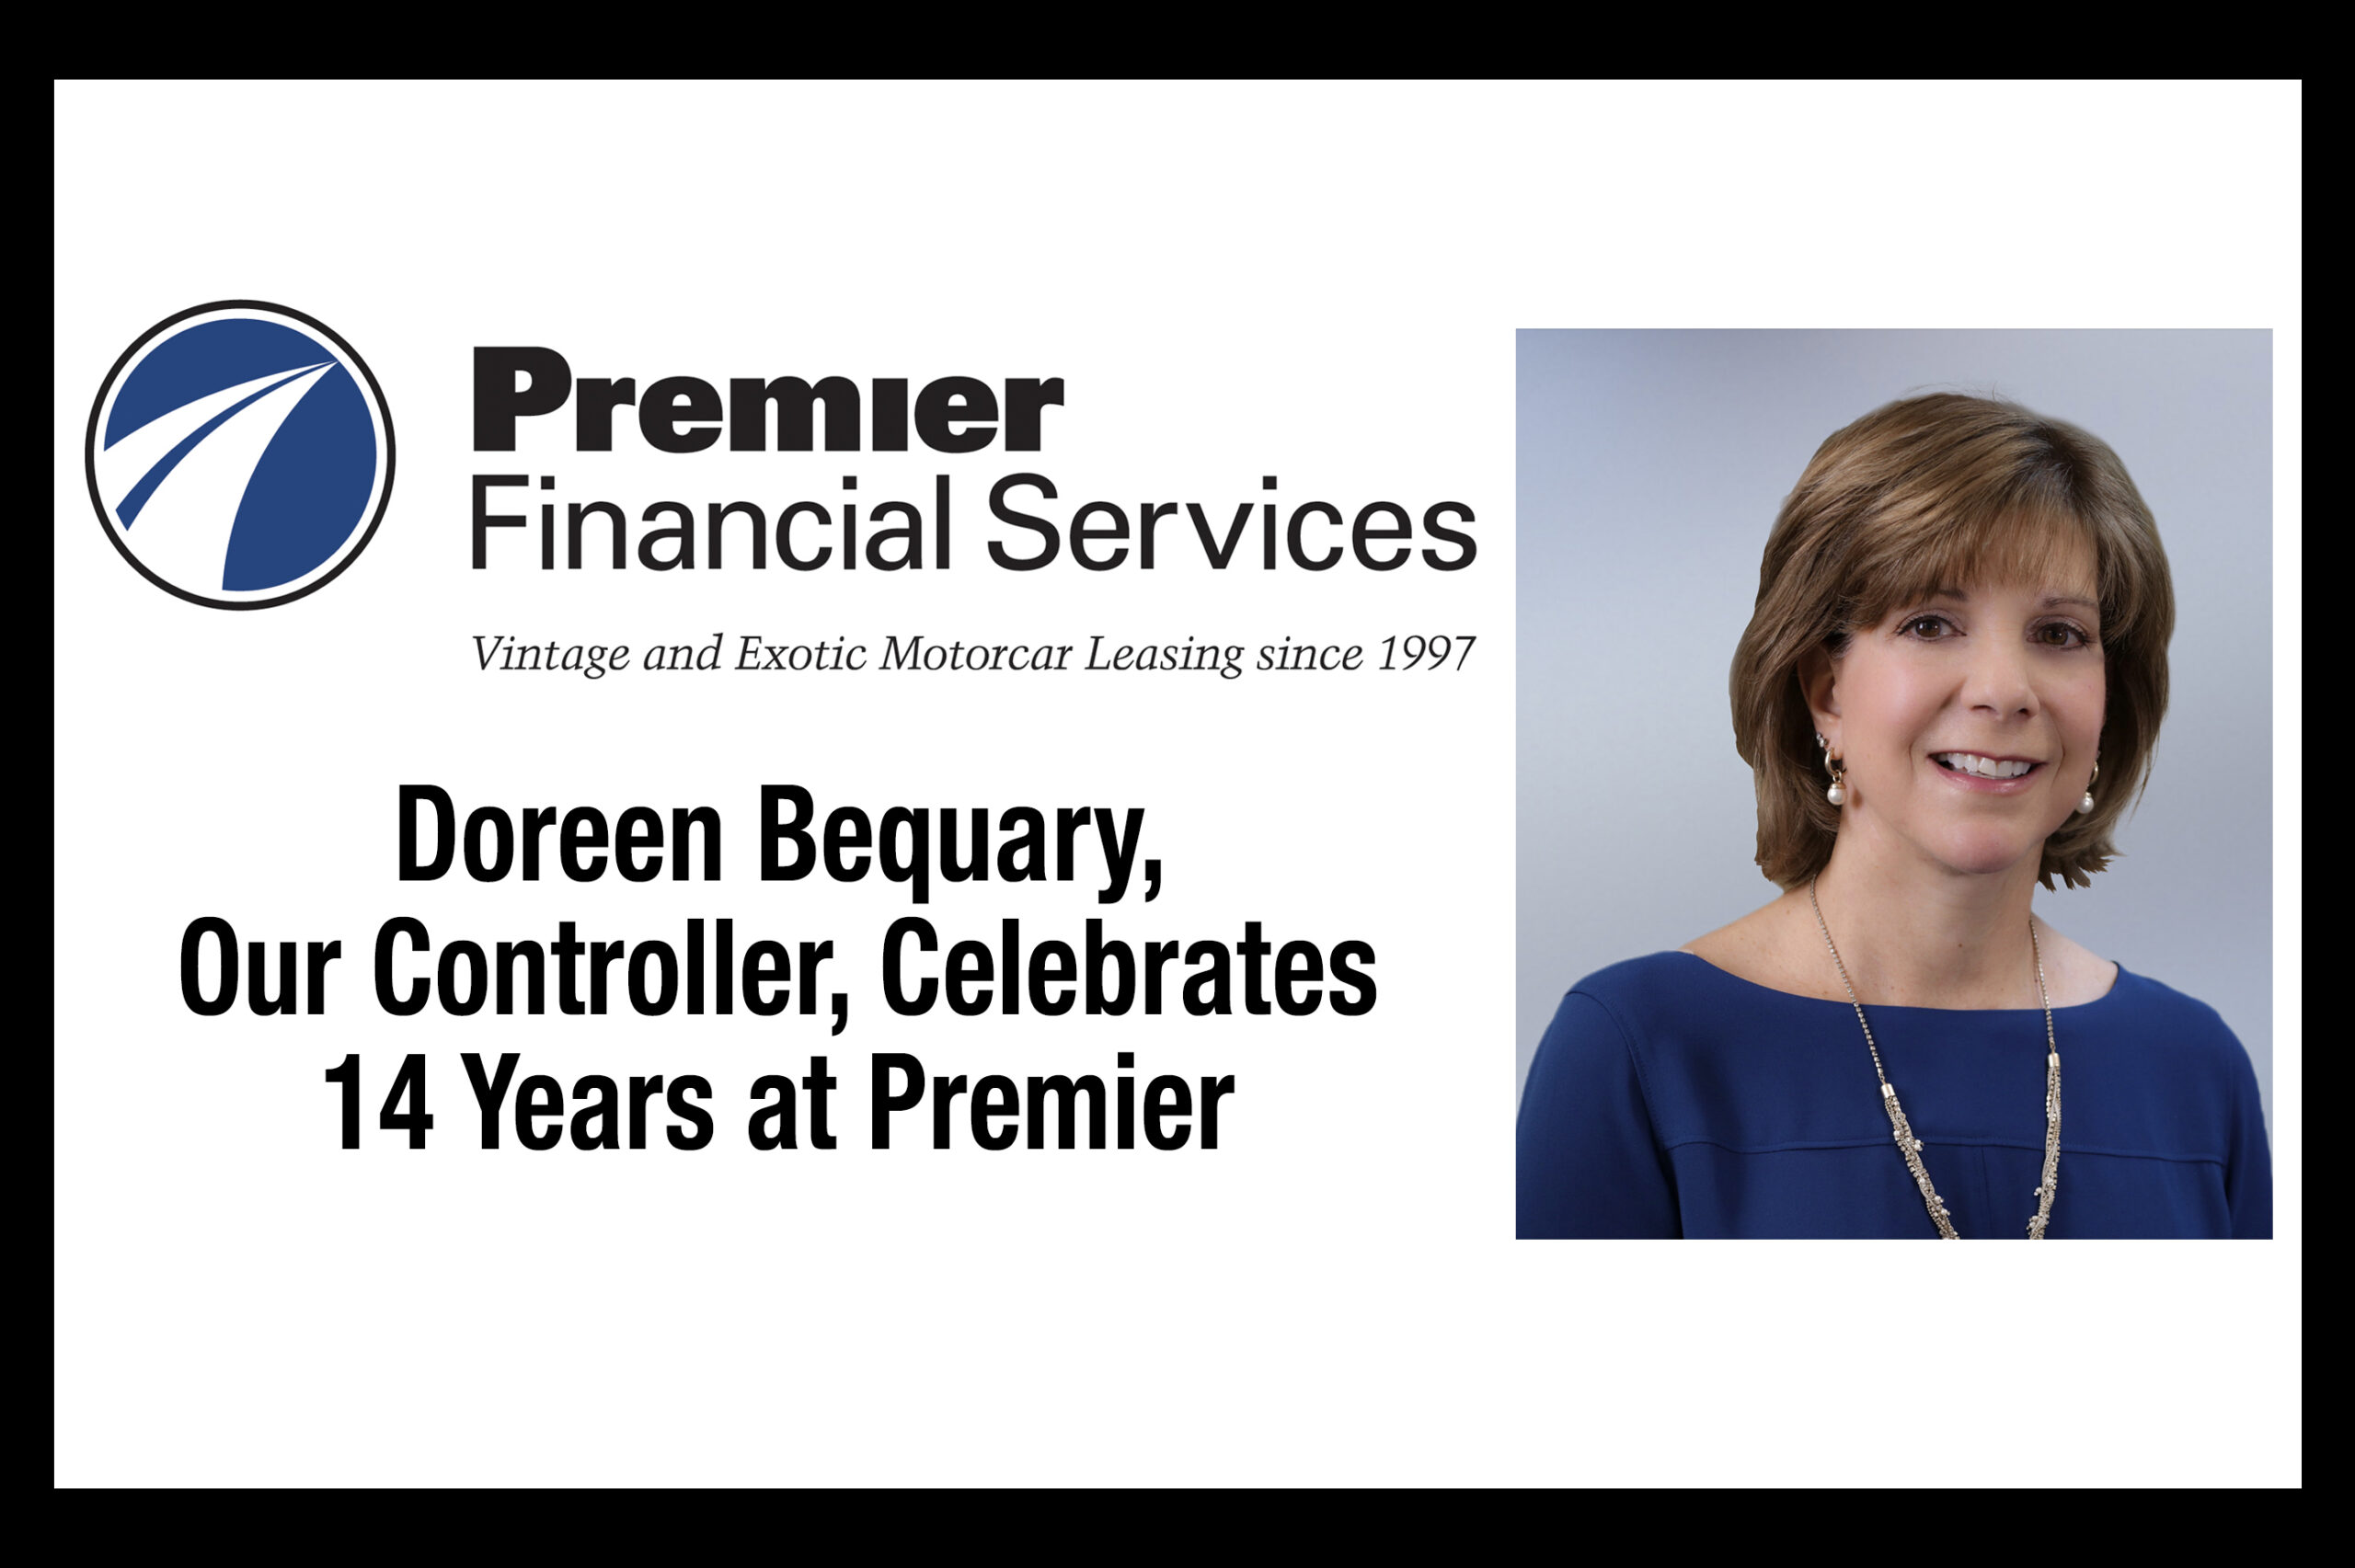 Doreen Bequary, Controller at Premier Financial Services celebrates 14 years